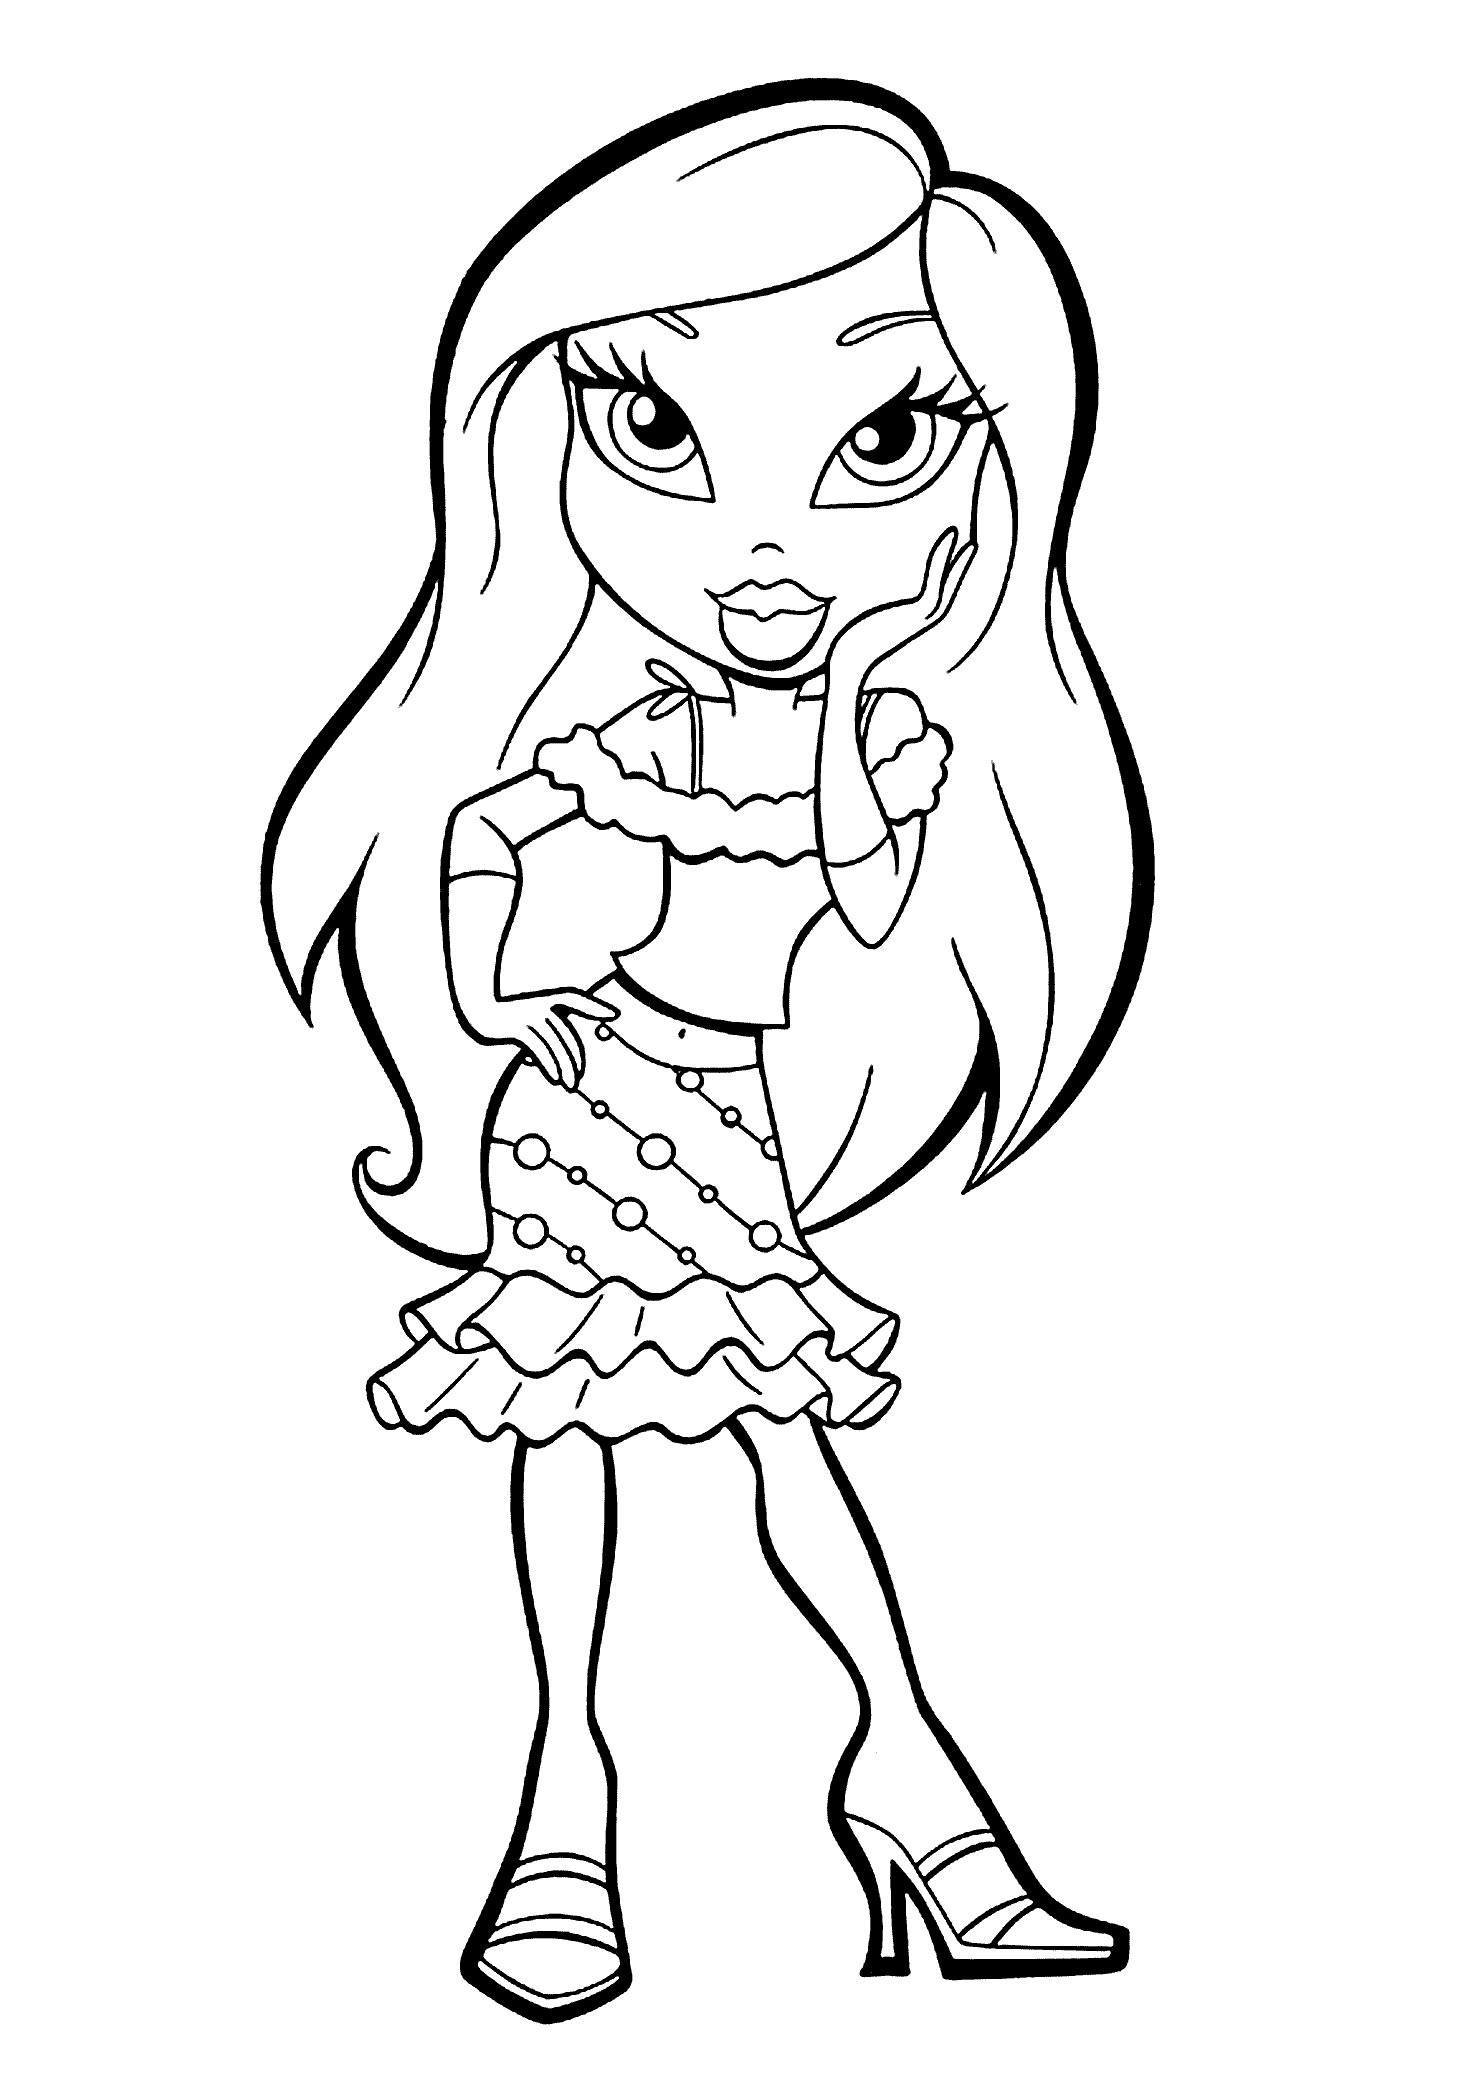 Free Printable Cartoon Characters Coloring Pages Download Free